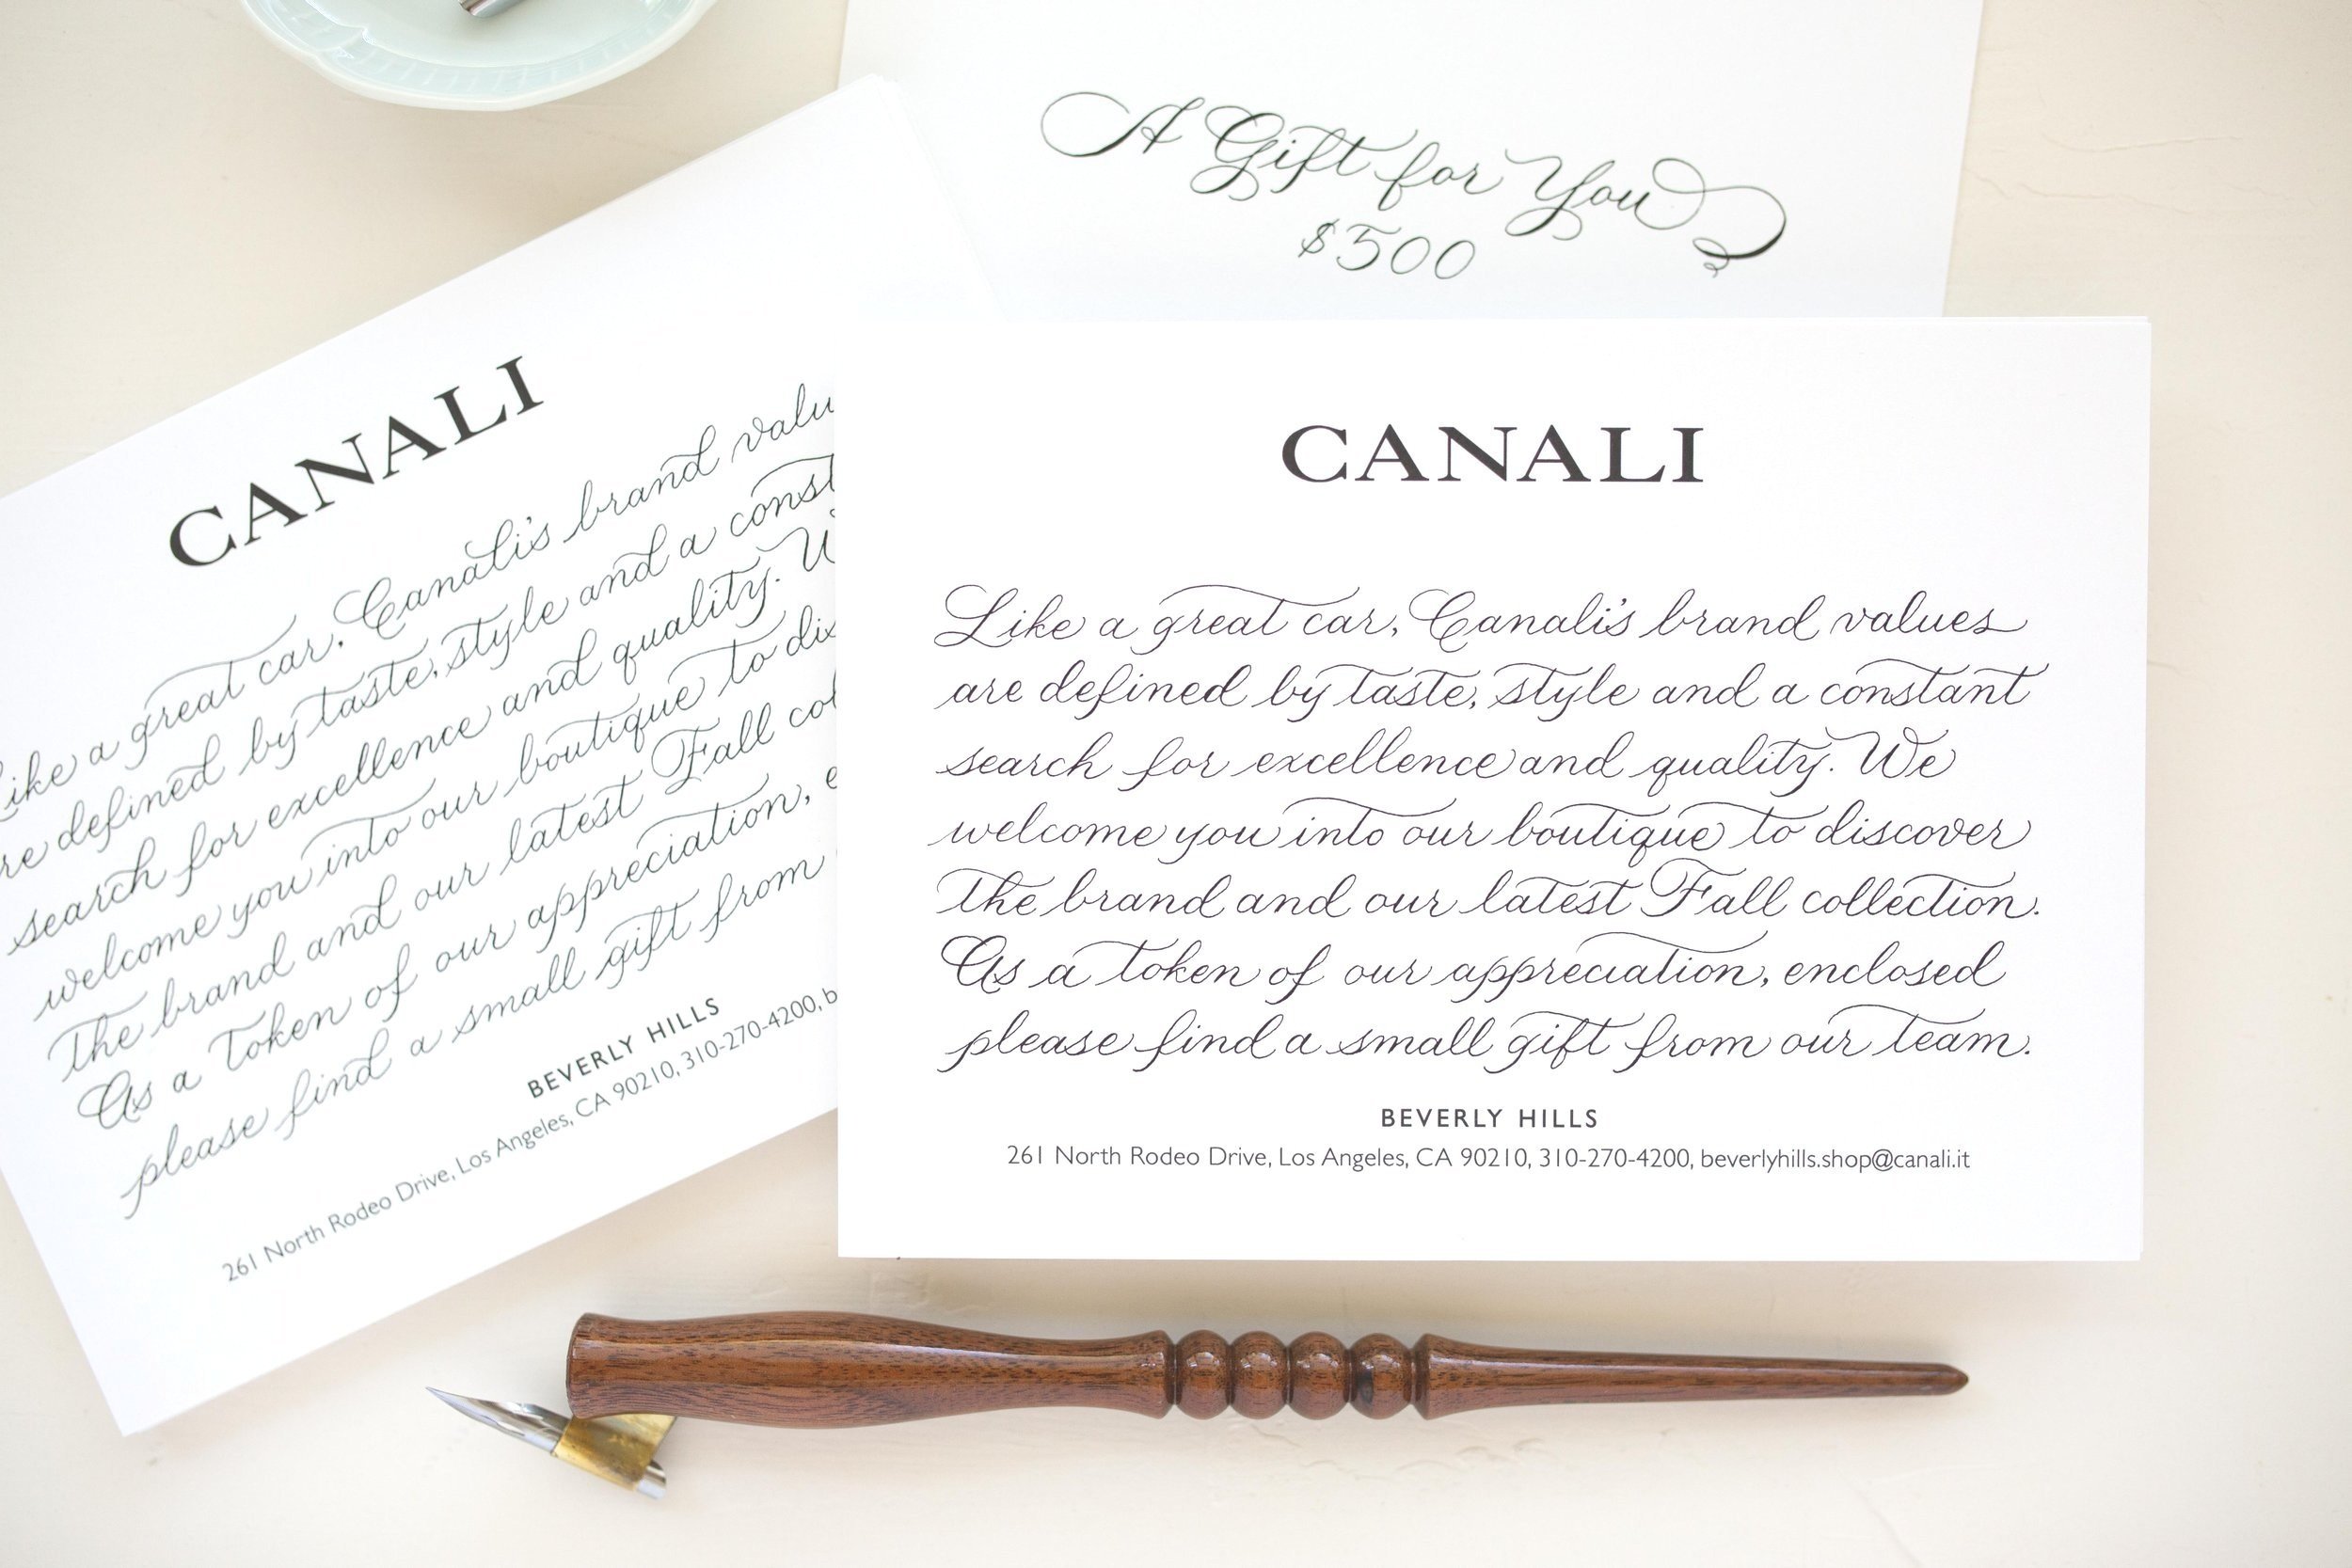 Canali - handwritten notes and gift certificates for VIP clients